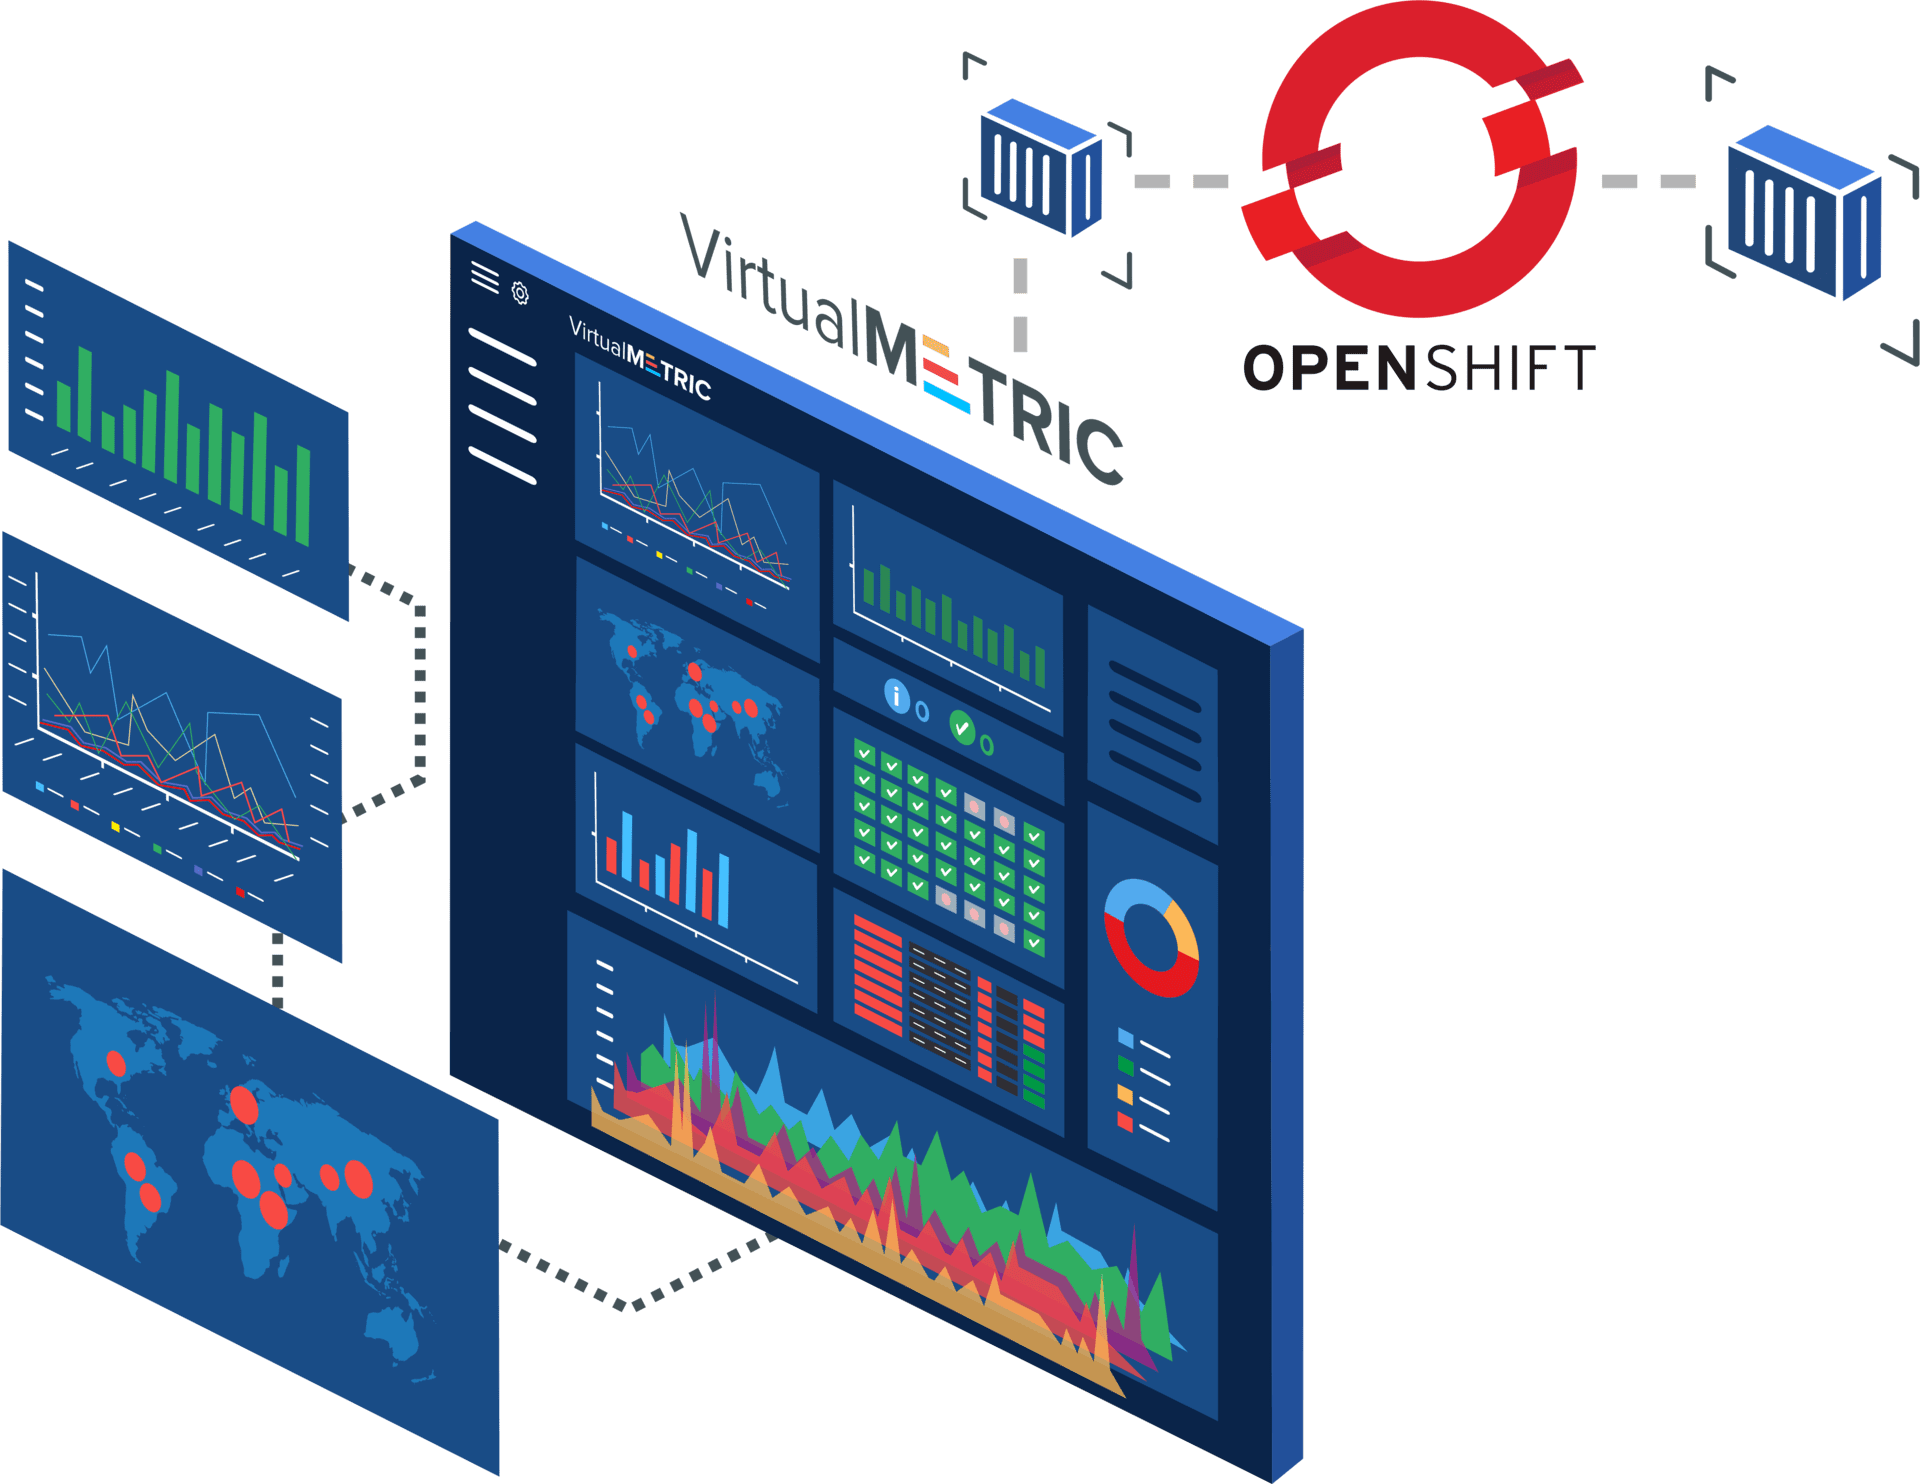 Track And Monitor Openshift Metrics in Full Detail